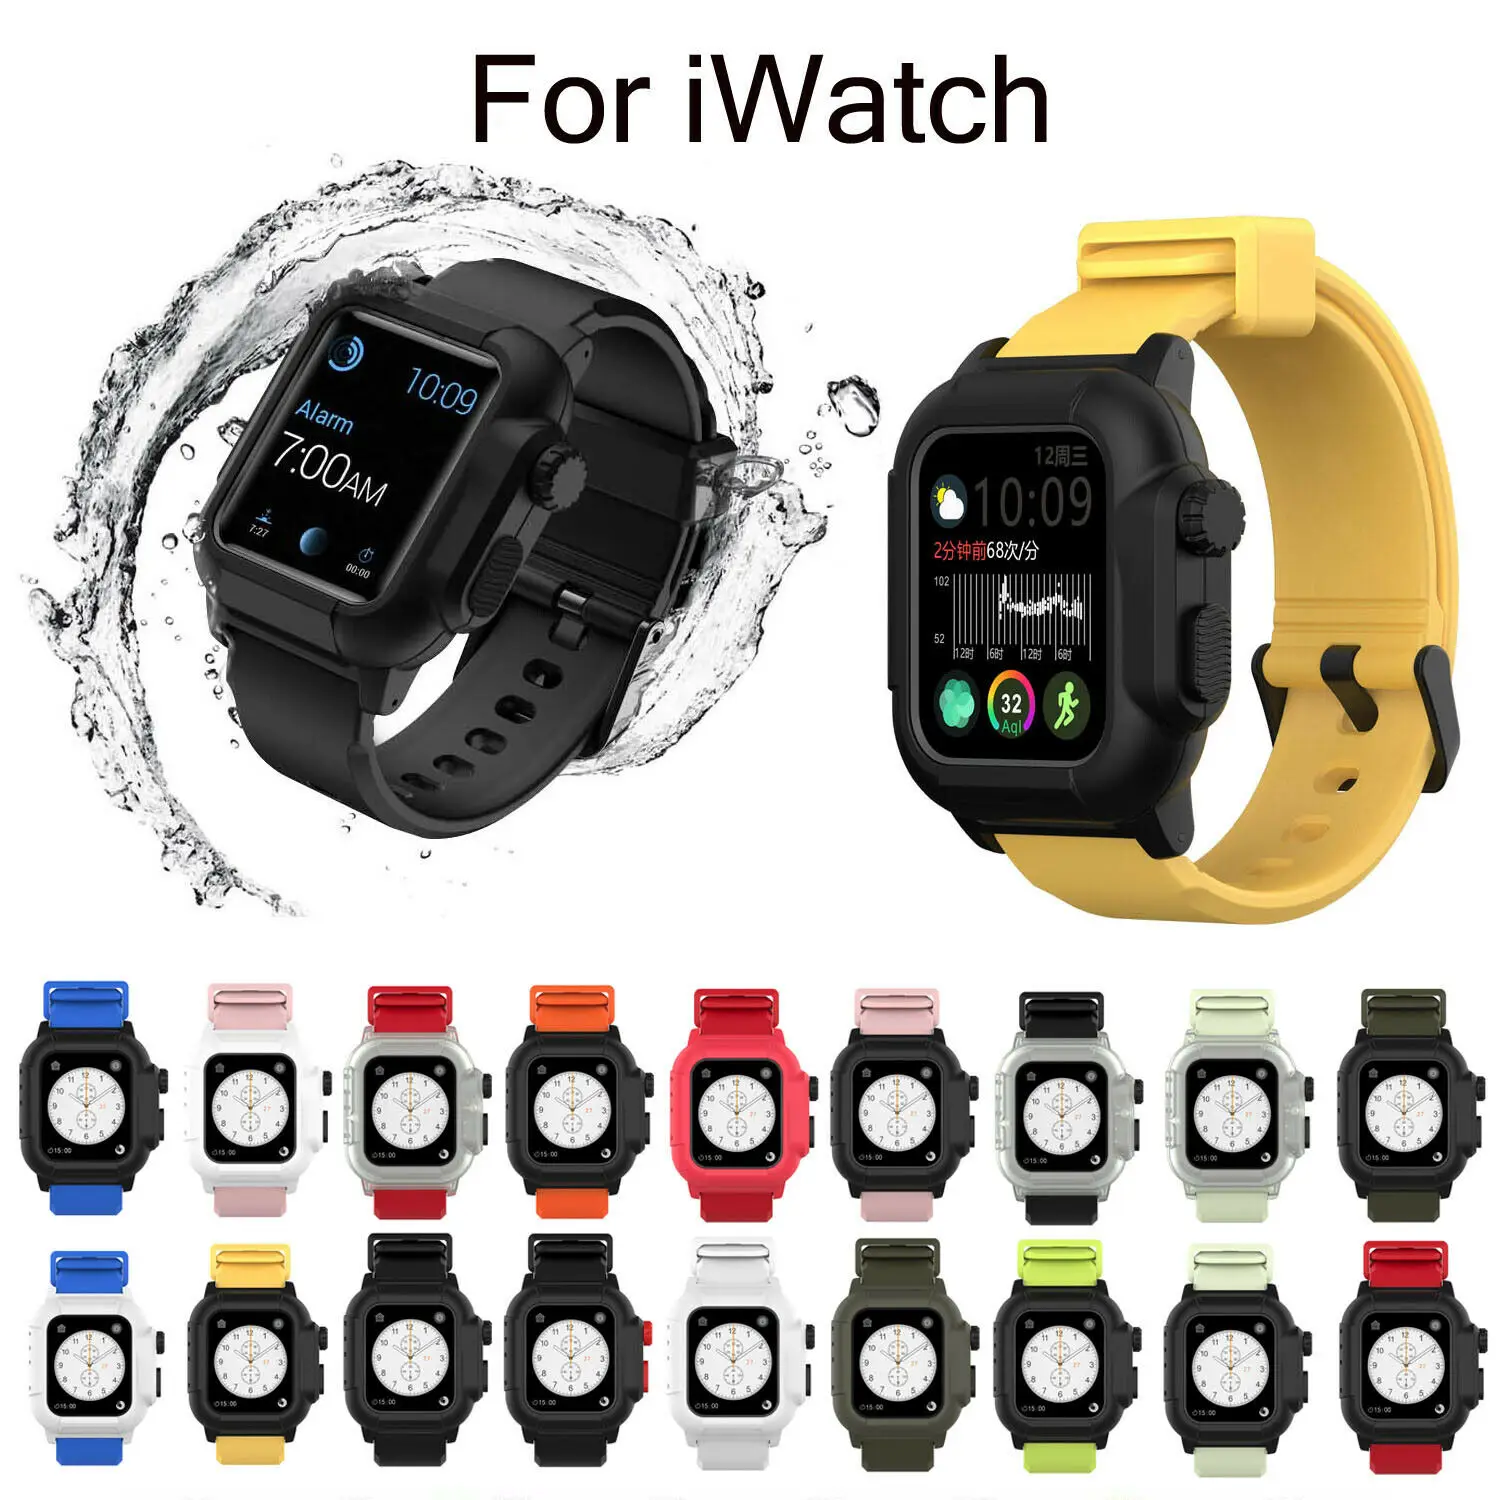 IP68 Waterproof Case For Apple Watch Band iWatch Series 4 5 Silicone Strap Cover Case Set 44mm 40mm Bracelet Accessories